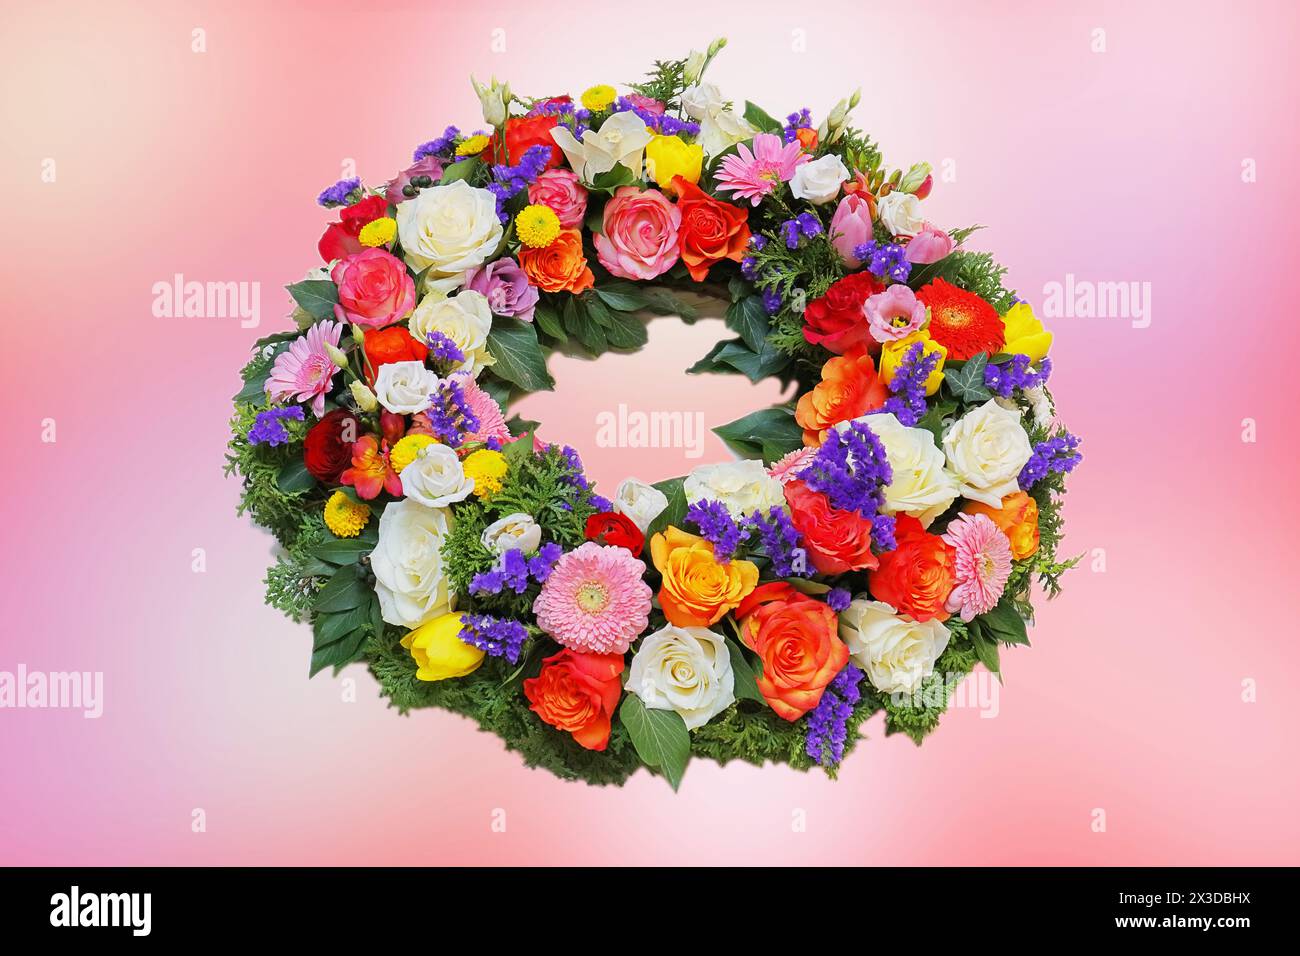 funeral wreath with colored blossoms Stock Photo